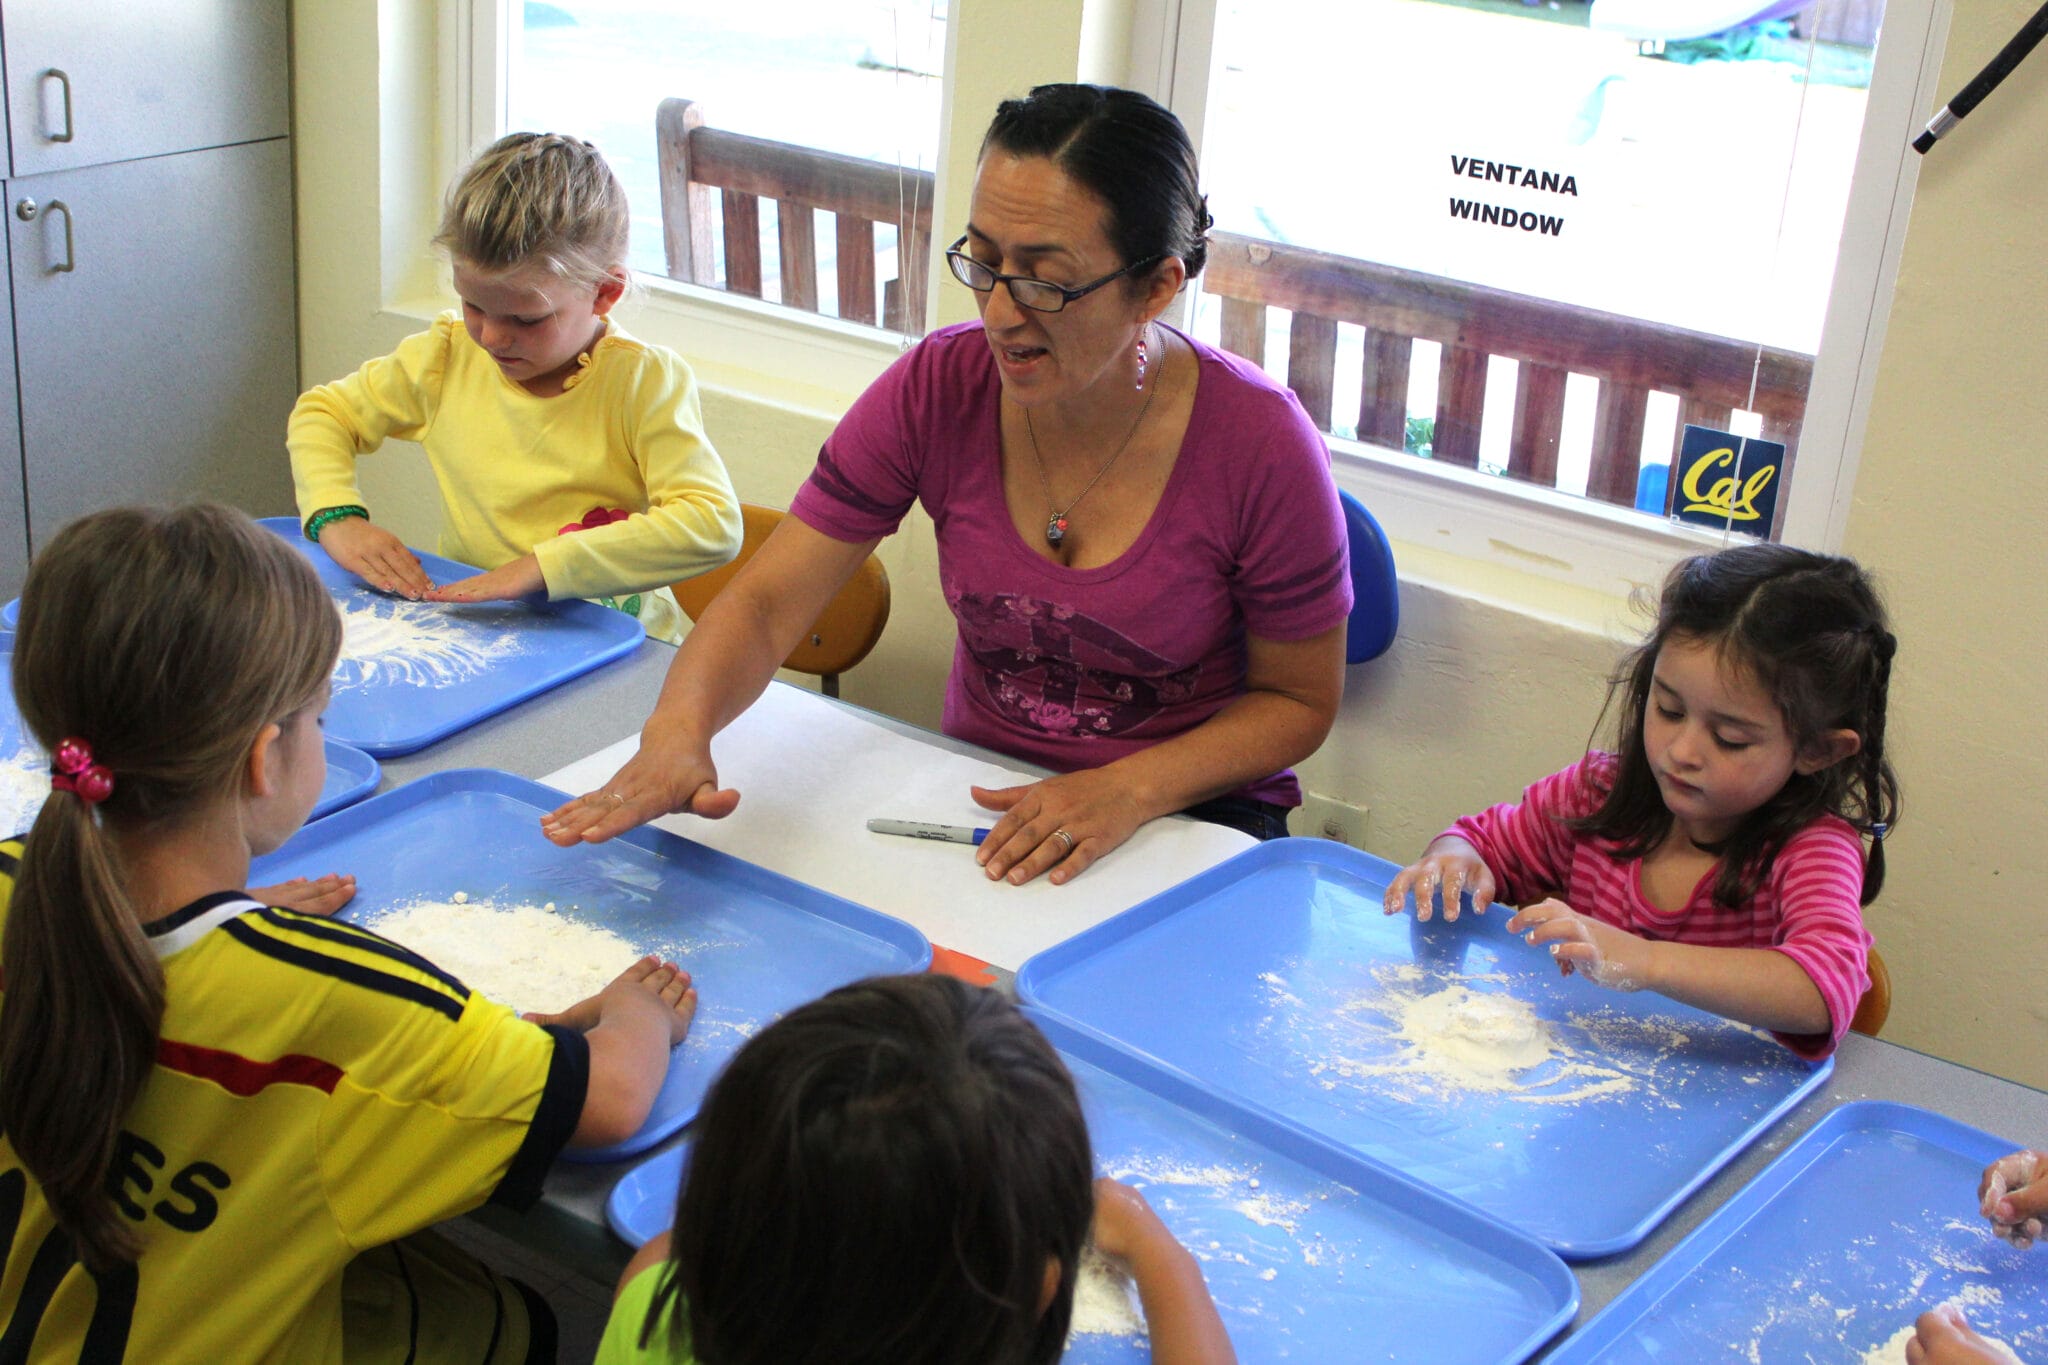 An early educator playing with flour at a table with children